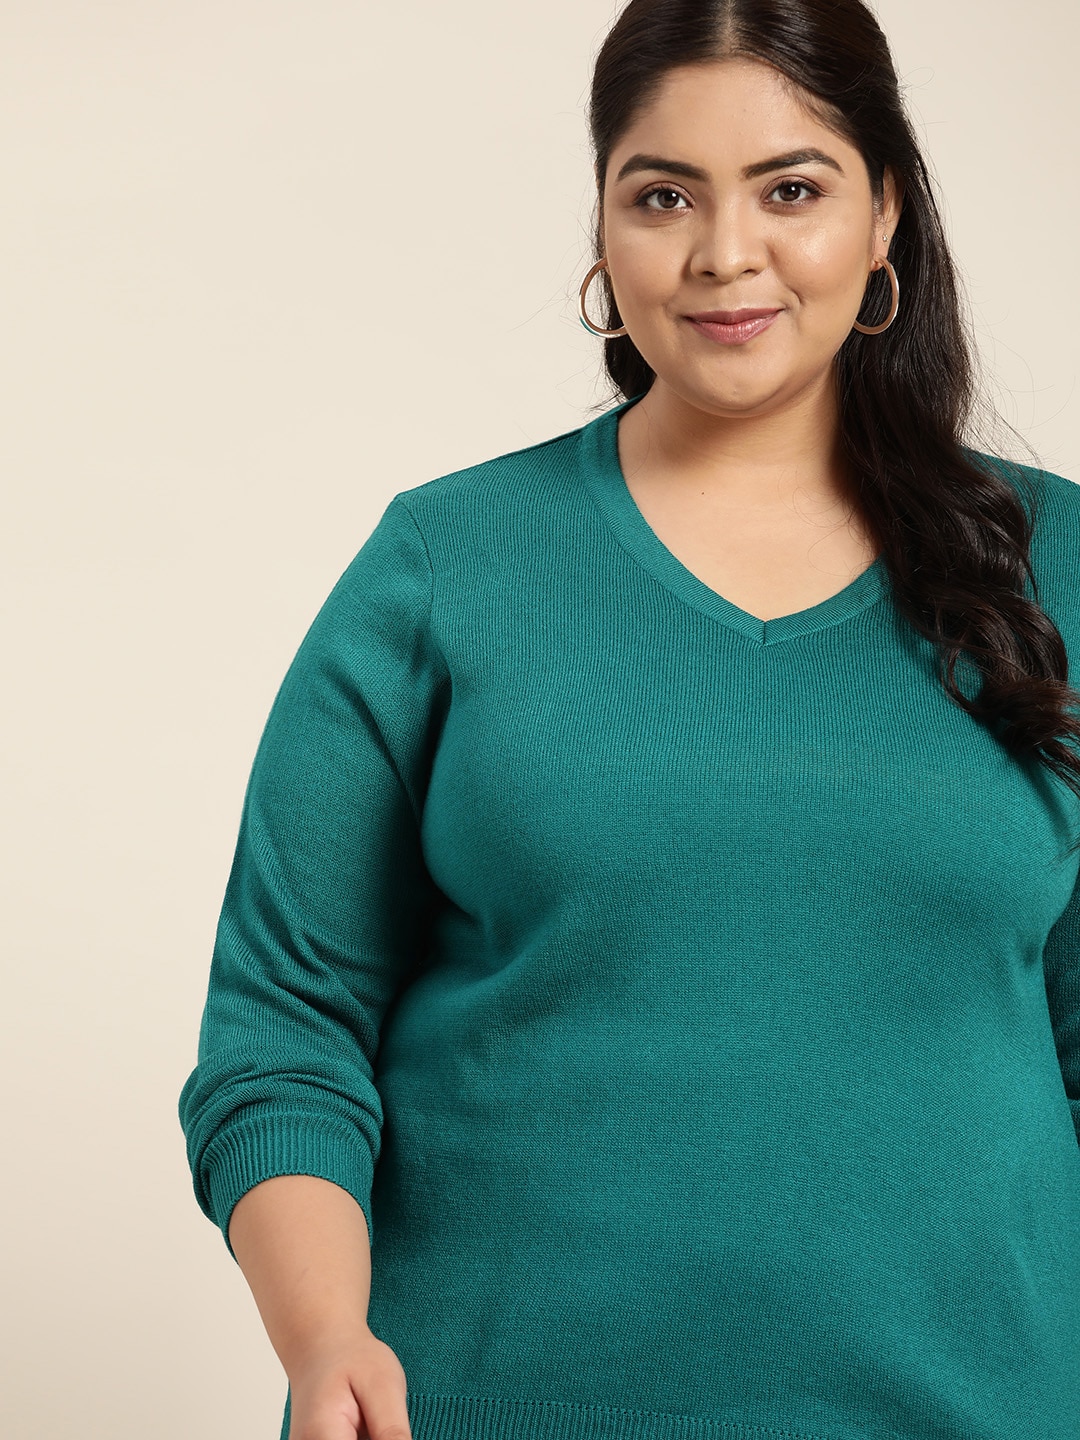 Sztori Women Plus Size Teal Green Solid Pullover Price in India